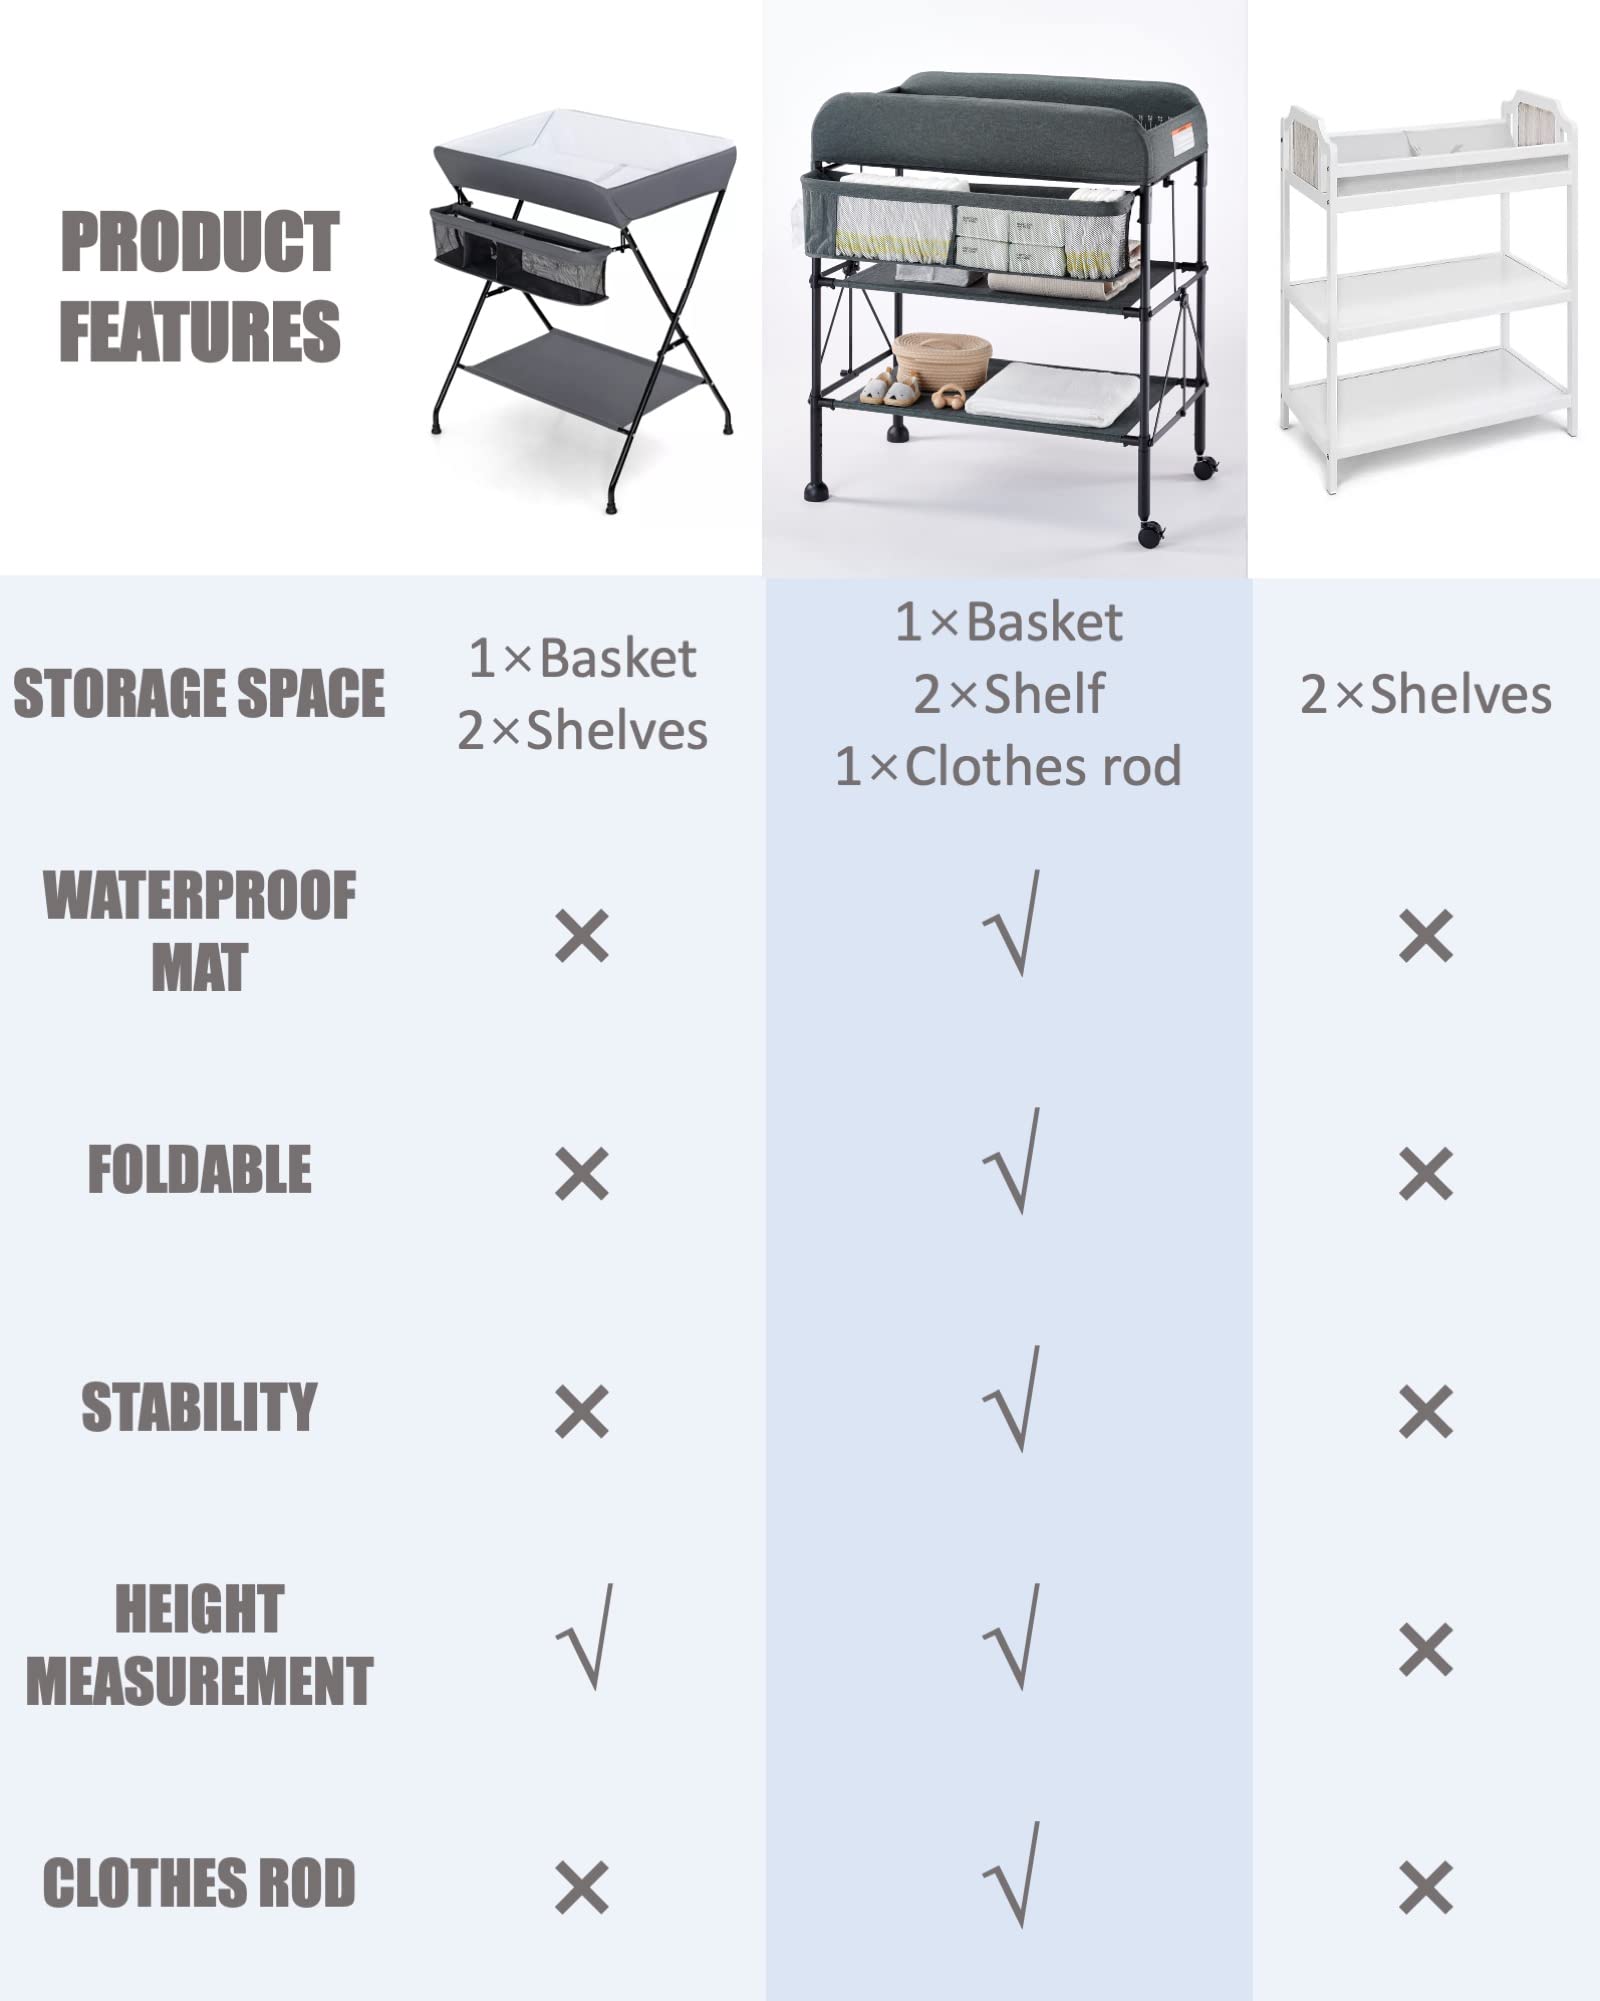 BEKA Portable Changing Table, Foldable Baby Changing Table, Changing Station for Infant w/Waterproof Diaper Changing Table Pad, Adjustable Height Diaper Station, Mobile Nursery Organizer for Newborn